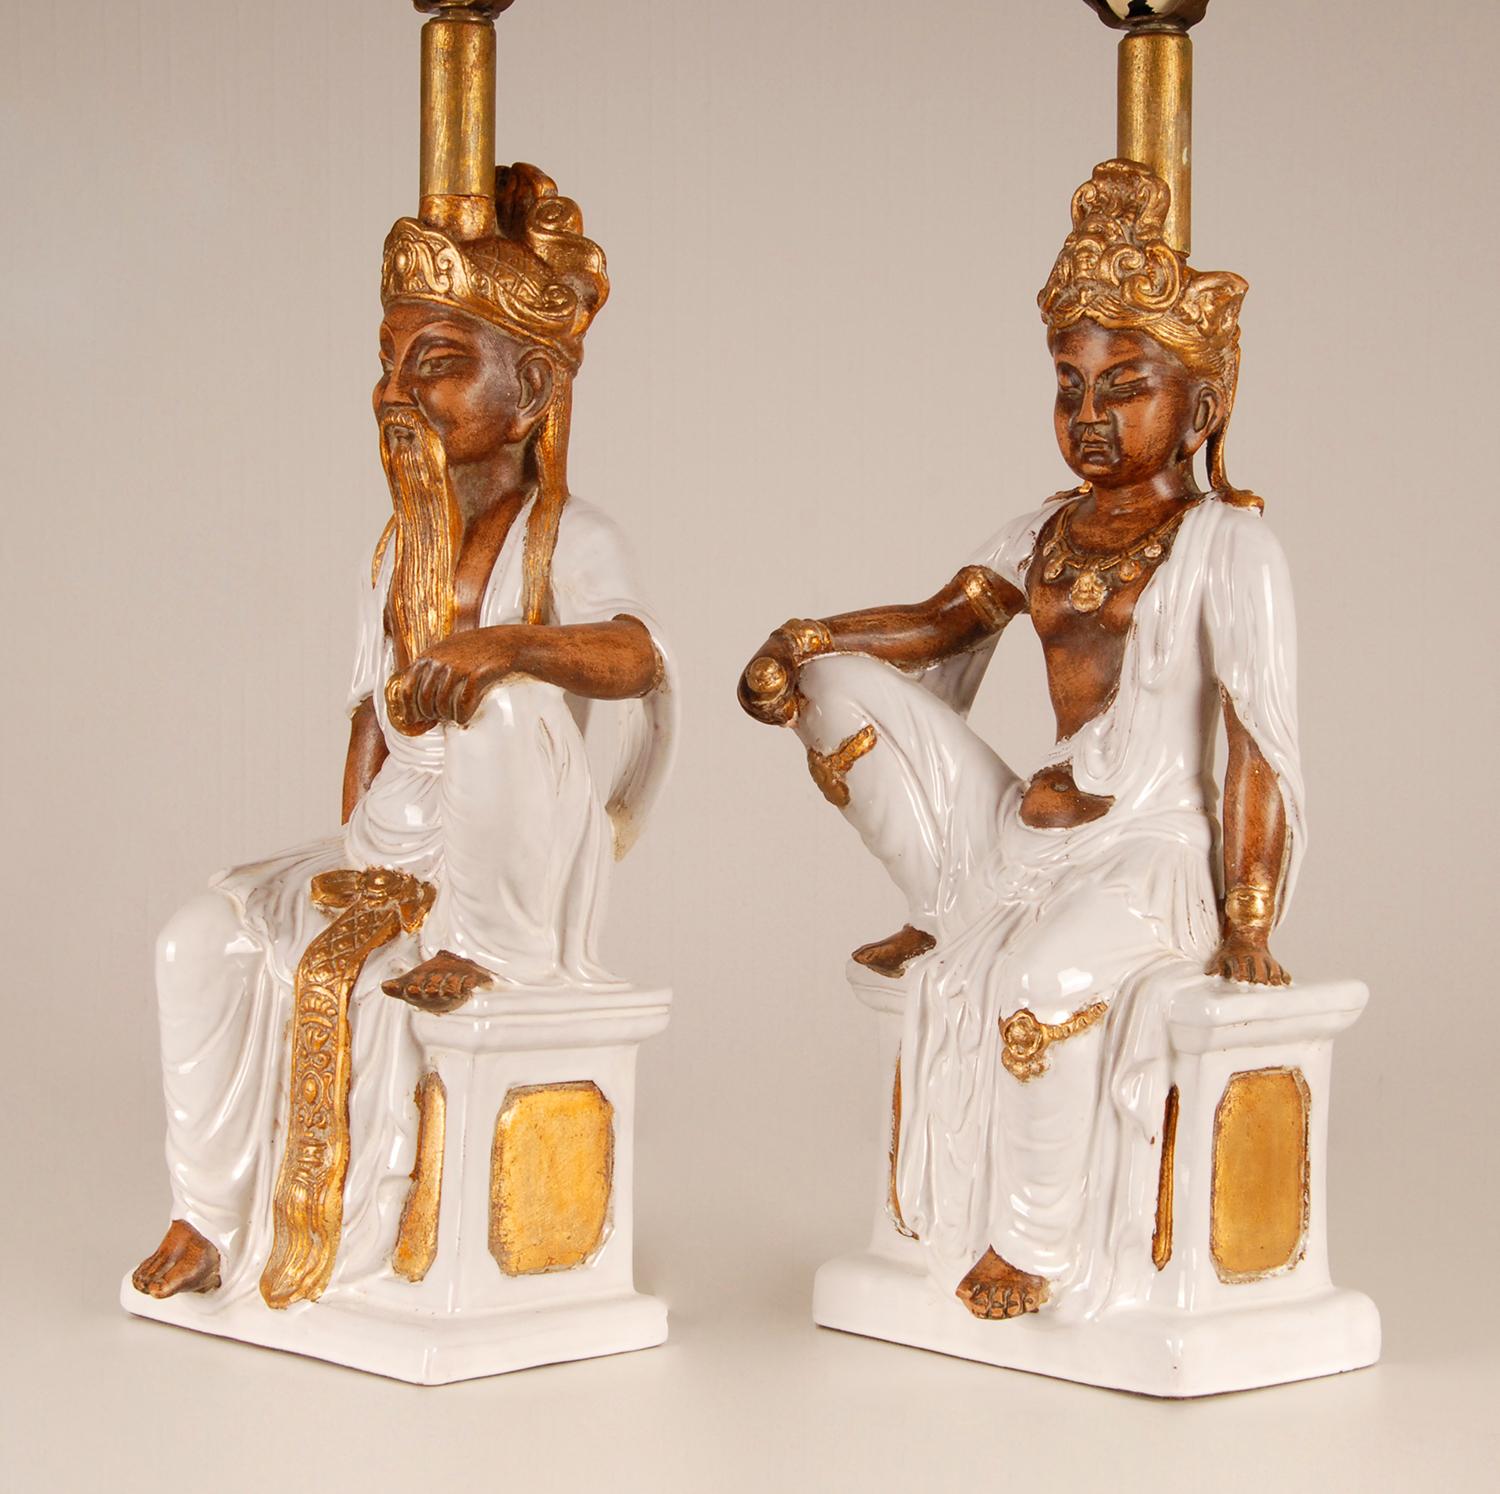 Vintage Ceramic Table Lamps Italian Chinoiserie Chinese Buddha figures Ceramic In Good Condition For Sale In Wommelgem, VAN